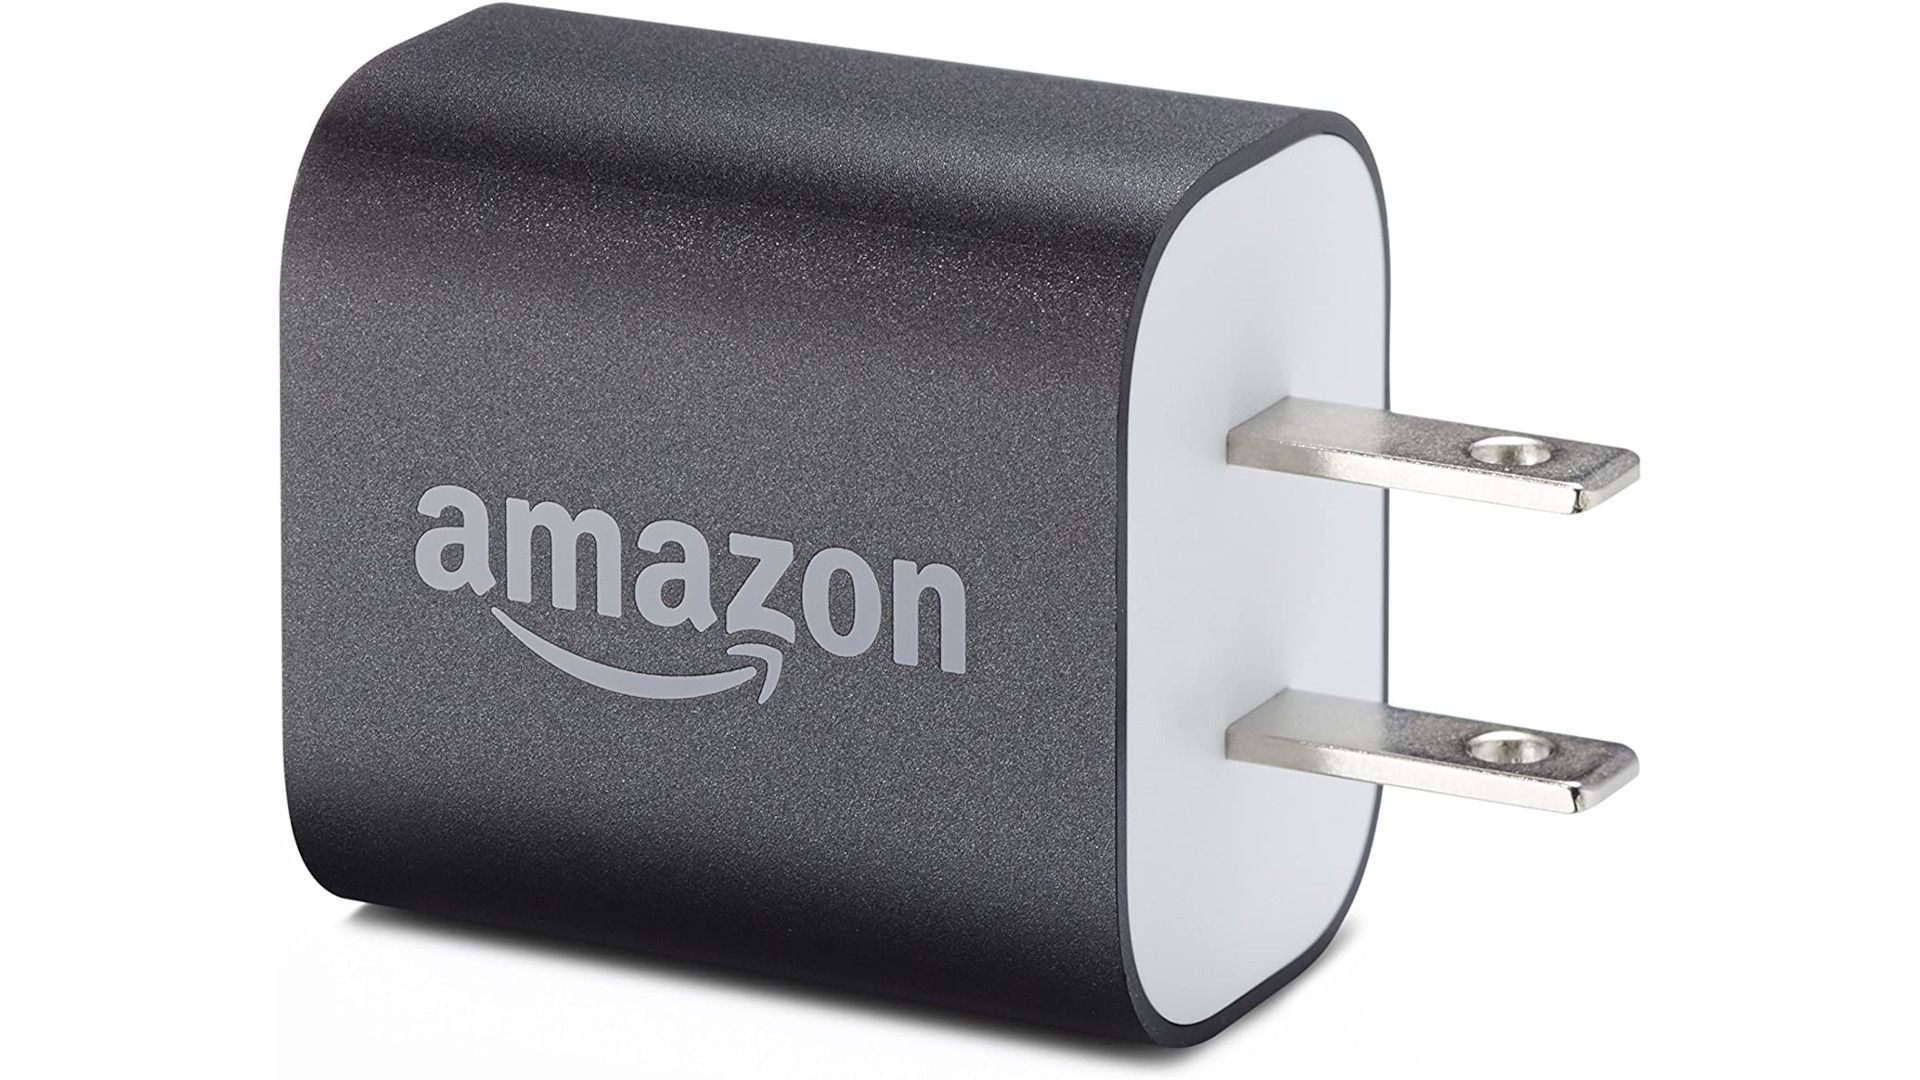 A screenshot shows a charger for a Kindle.